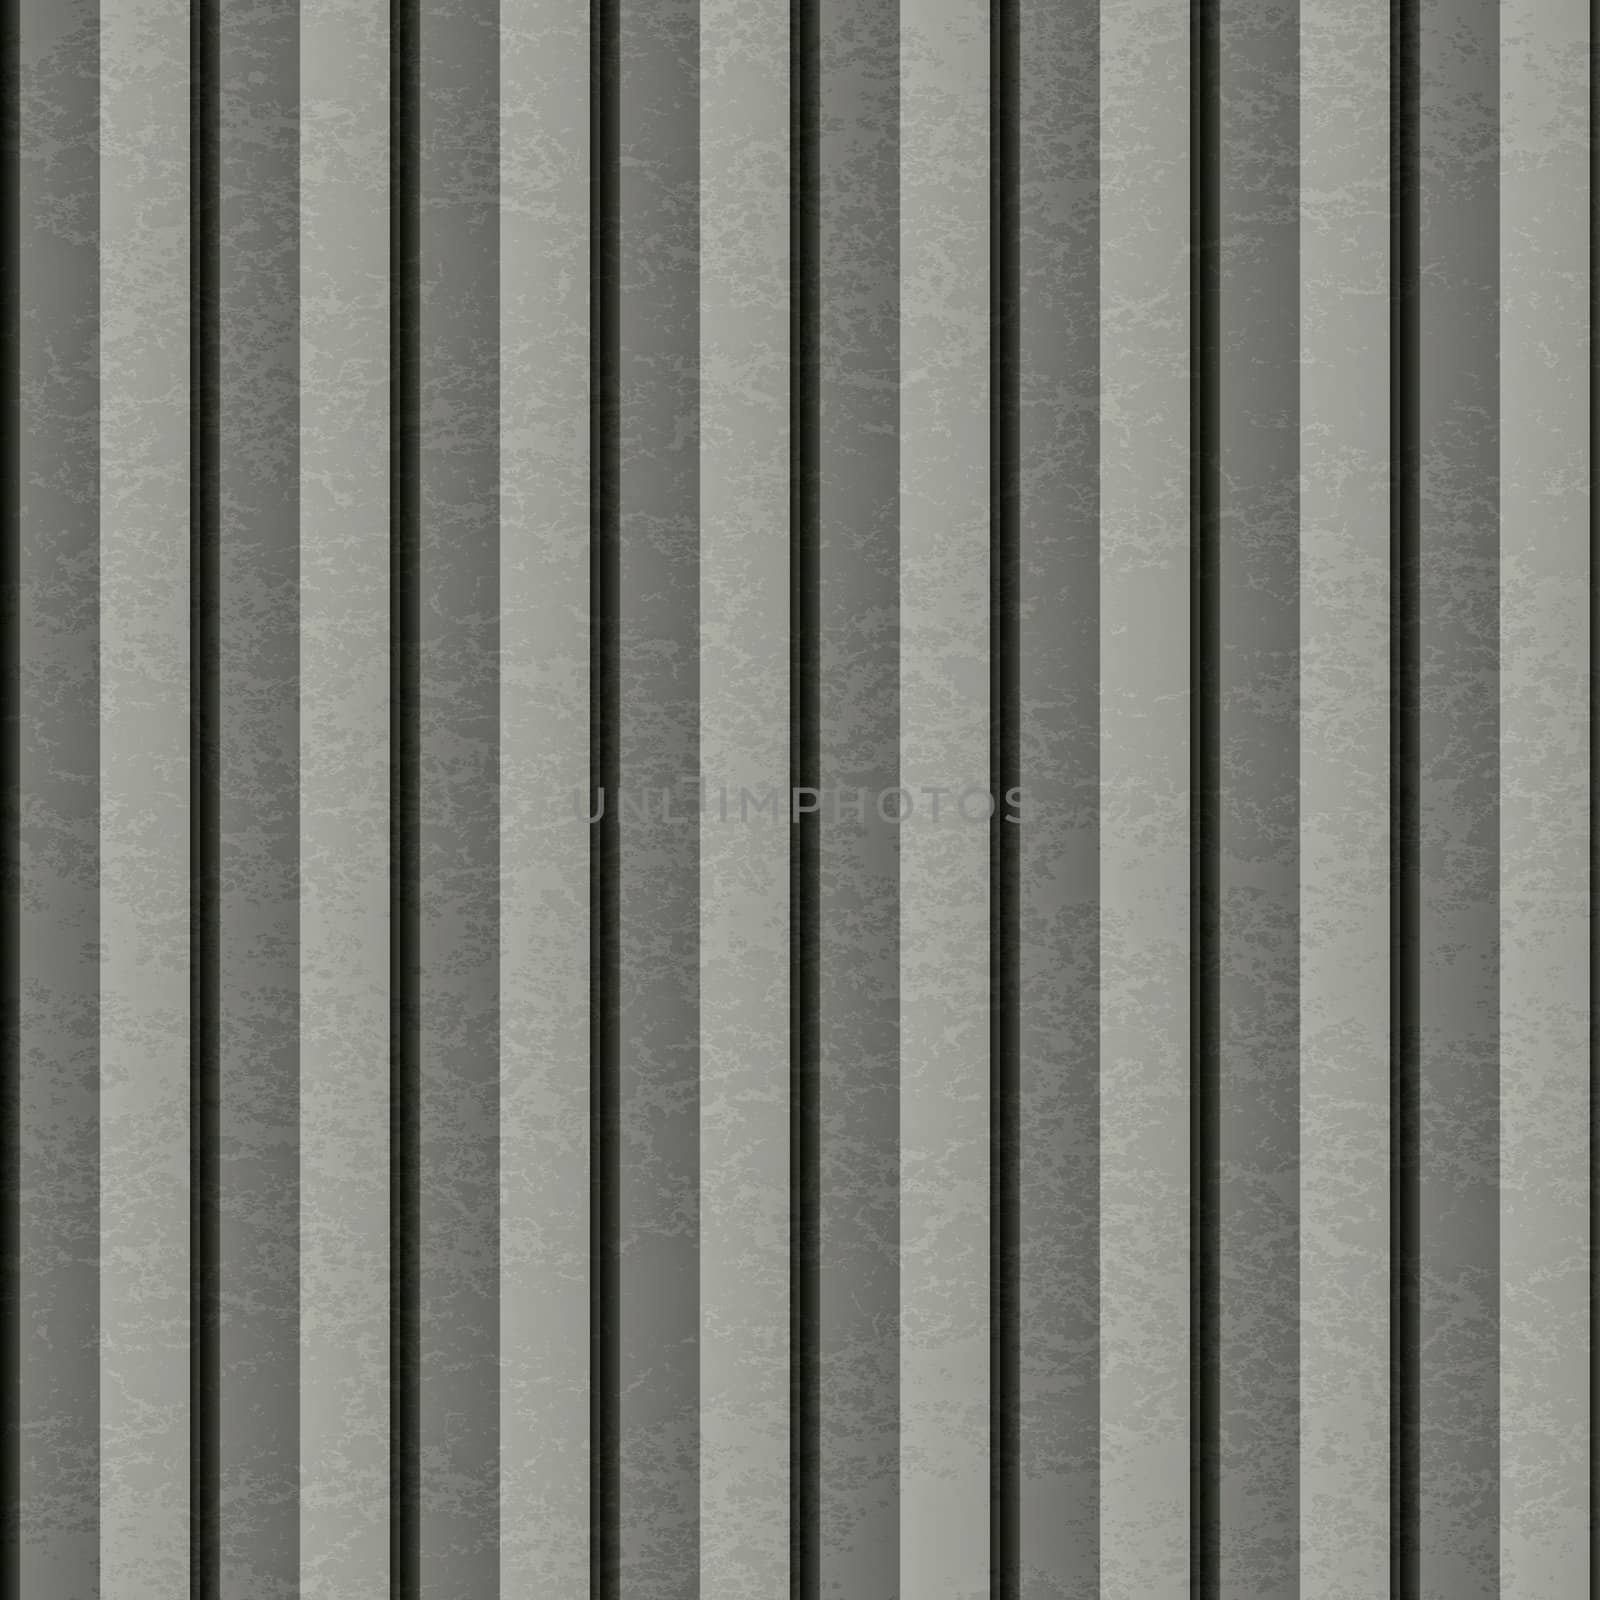 A ribbed silver metal texture that tiles seamlessly as a pattern.